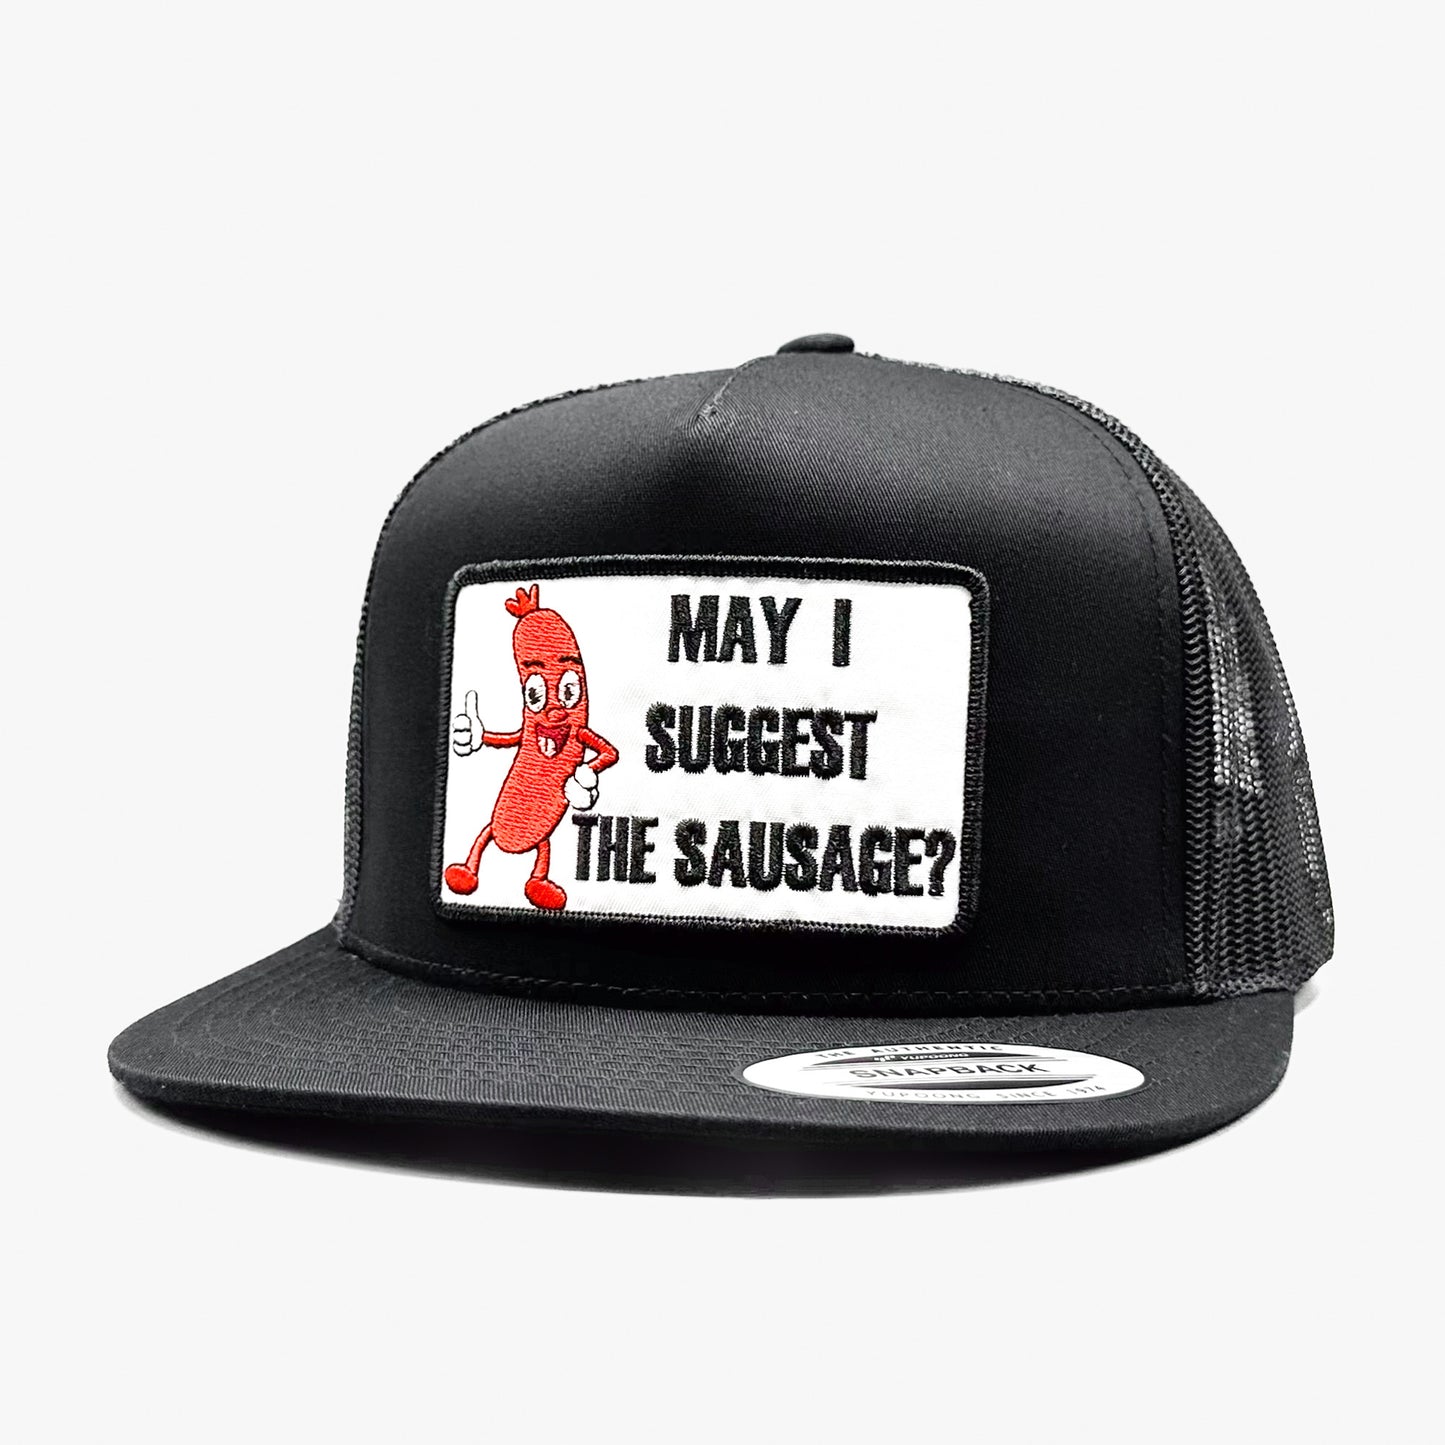 May I Suggest the Sausage Trucker Hat